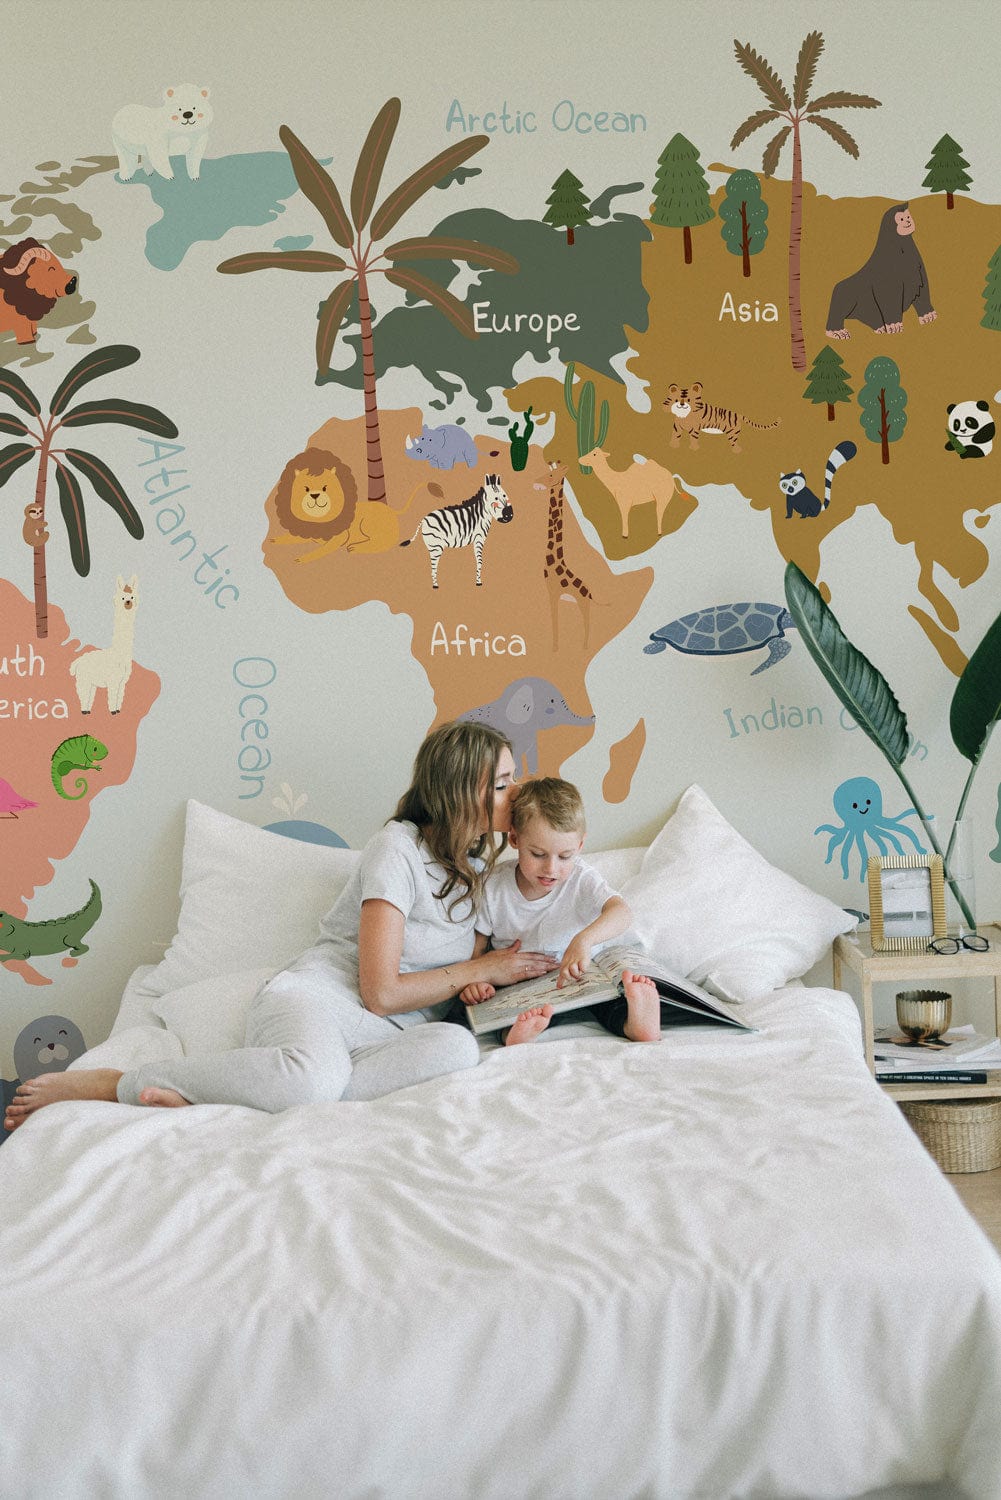 Mural wallpaper in the form of a blue animal map, intended for use in a child's bedroom decor